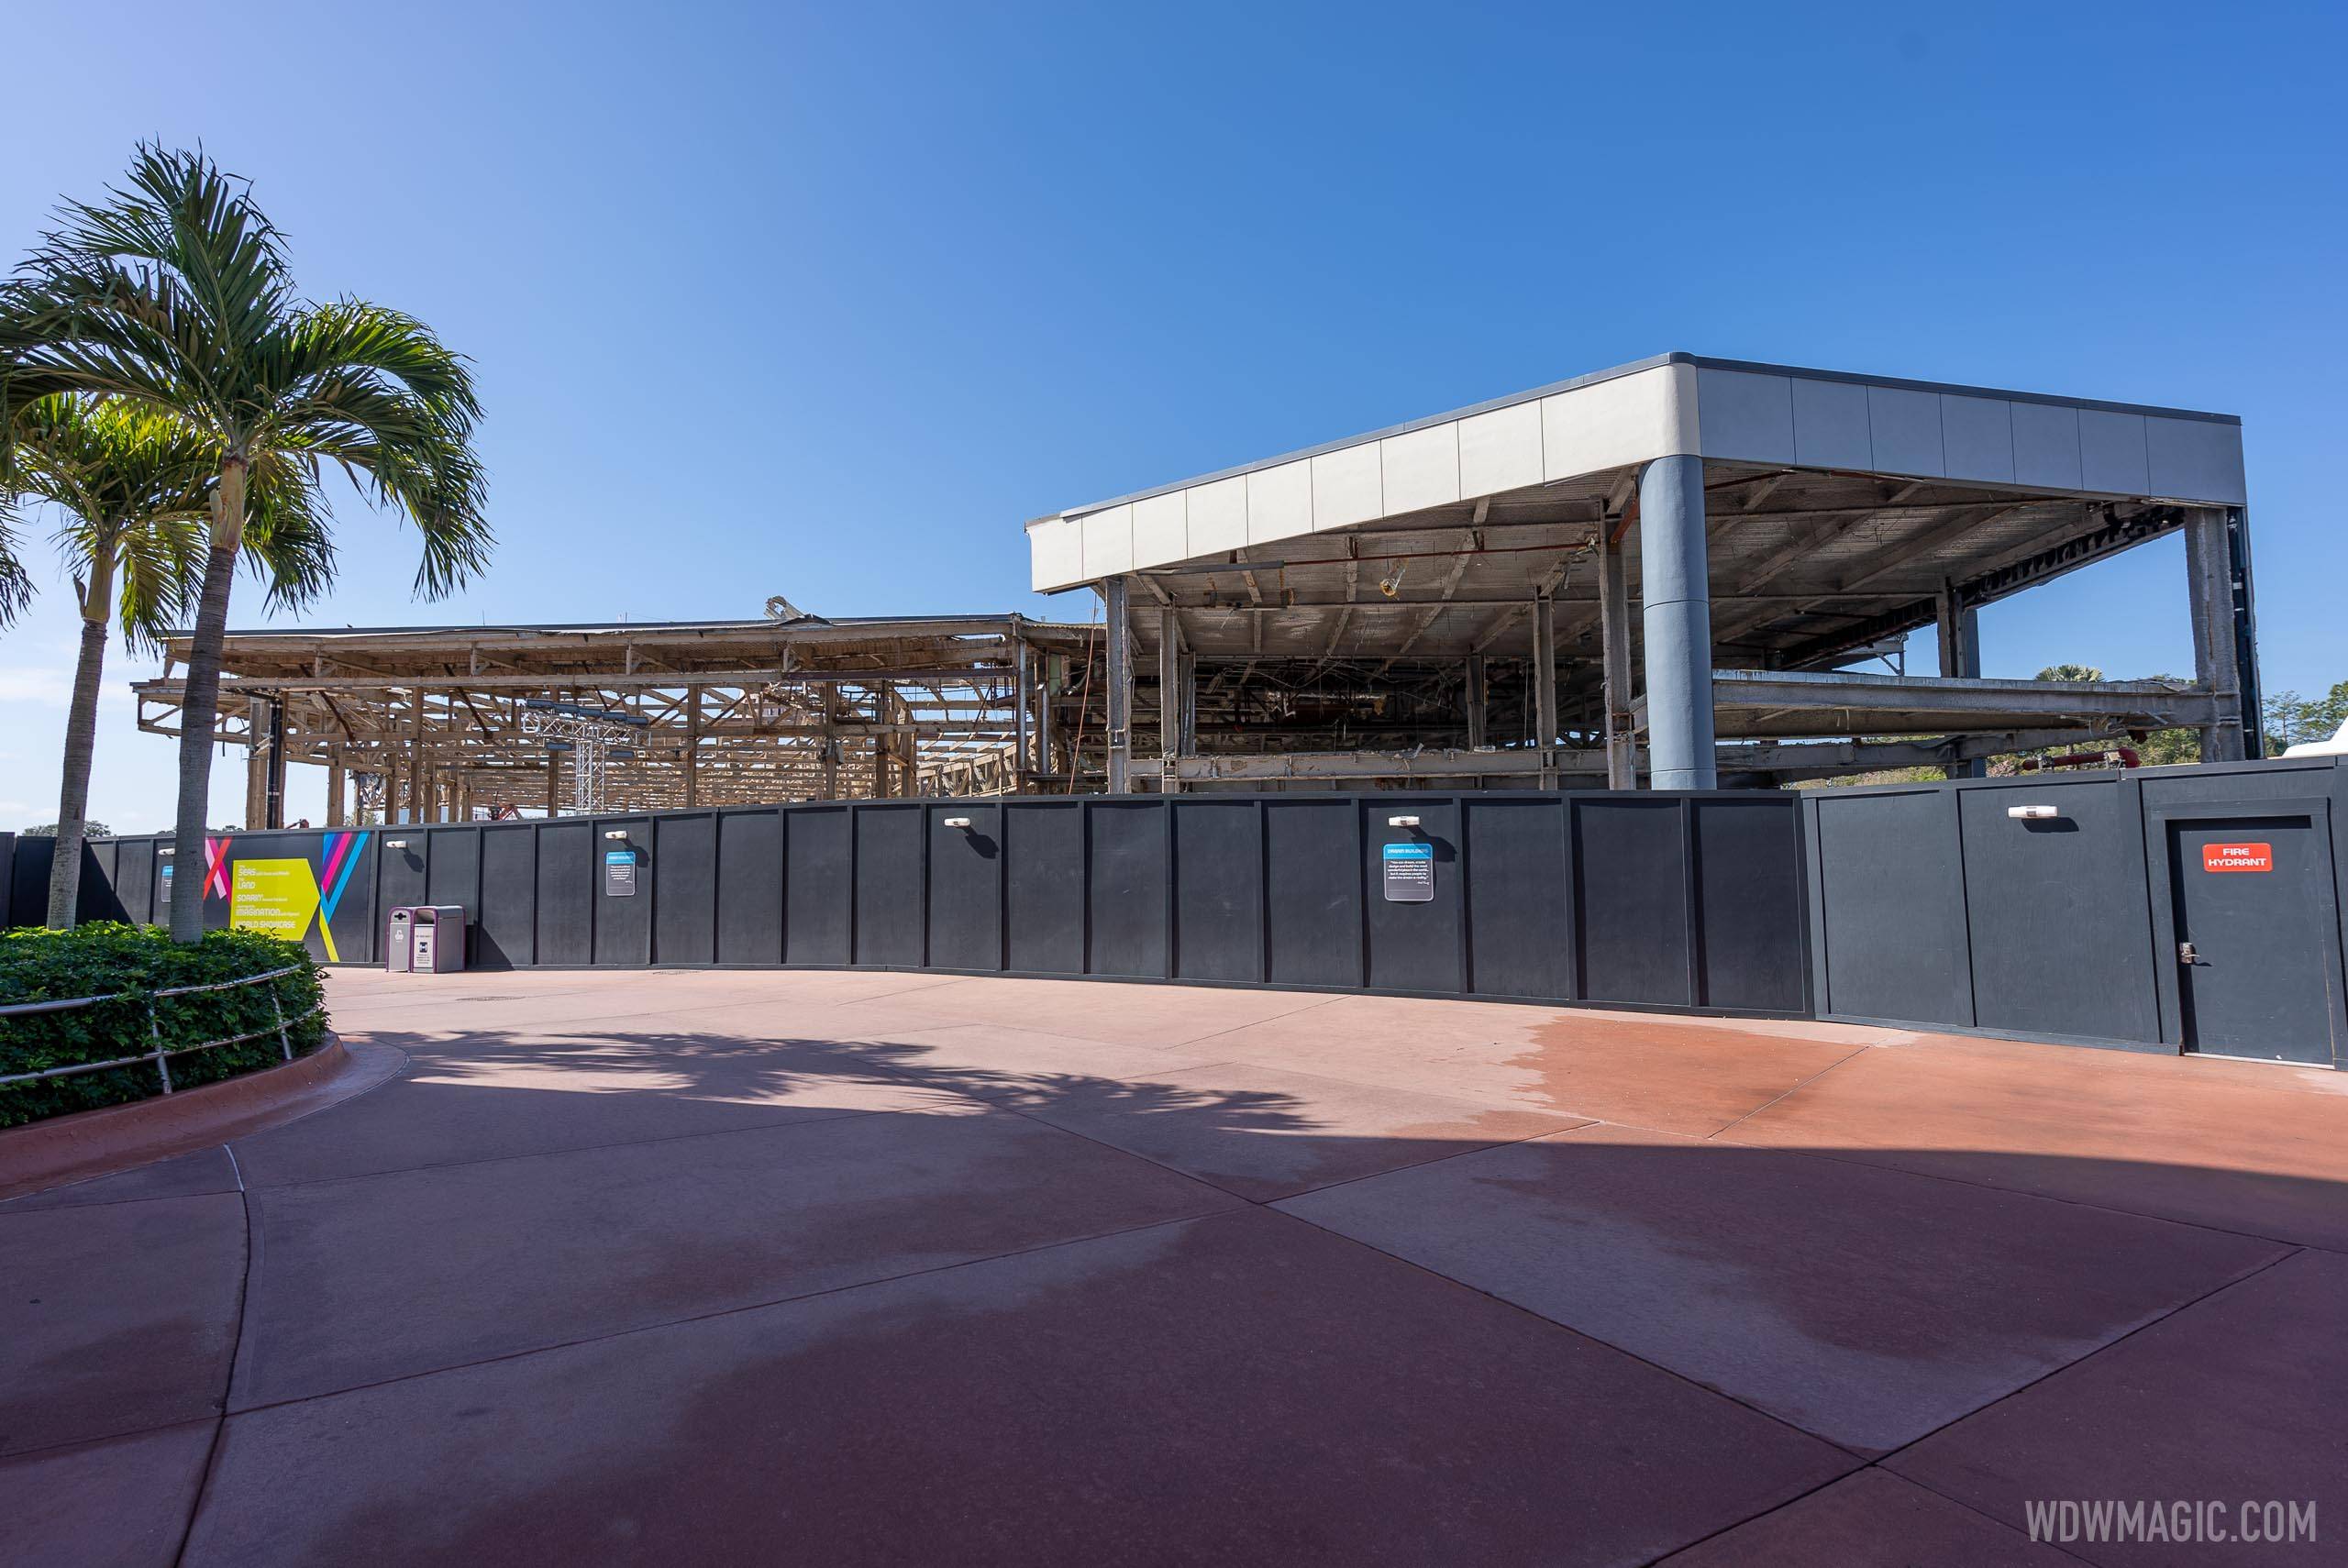 PHOTOS - Innoventions West demolition picking up pace as roof removal continues